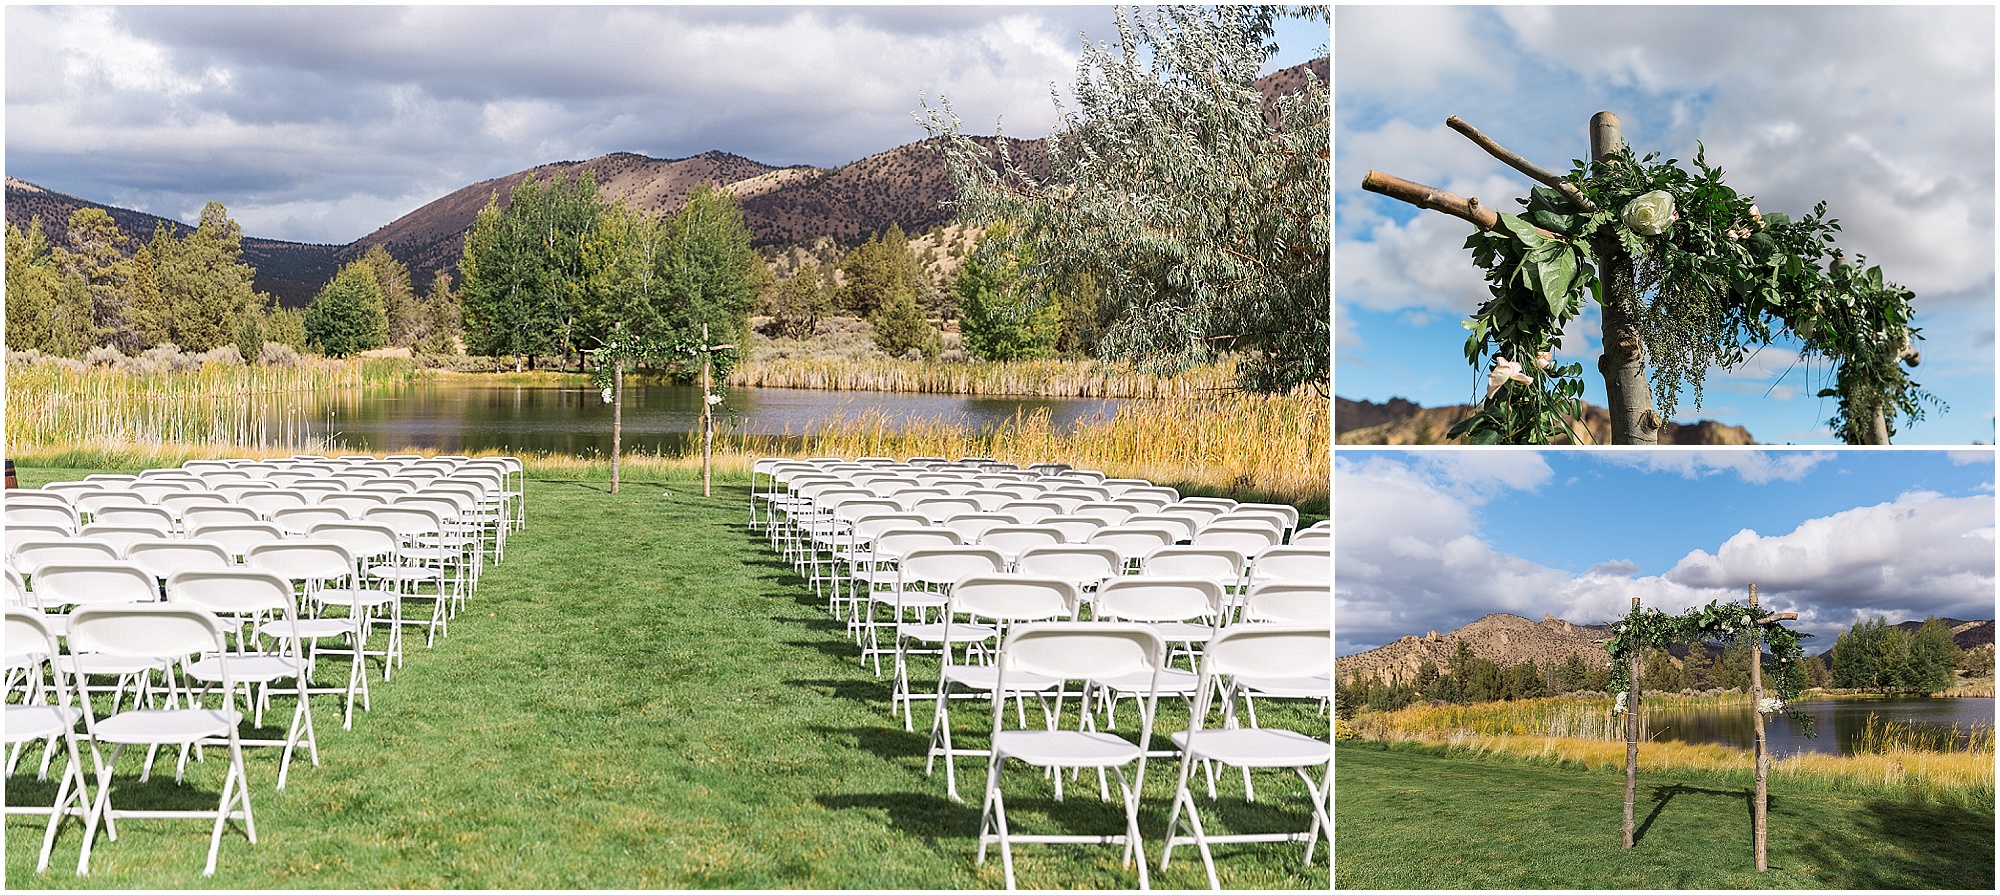 Smith Rock views from the outdoor ceremony location at the Tuscan Stables wedding venue at Ranch at the Canyons in Central Oregon. | Erica Swantek Photography